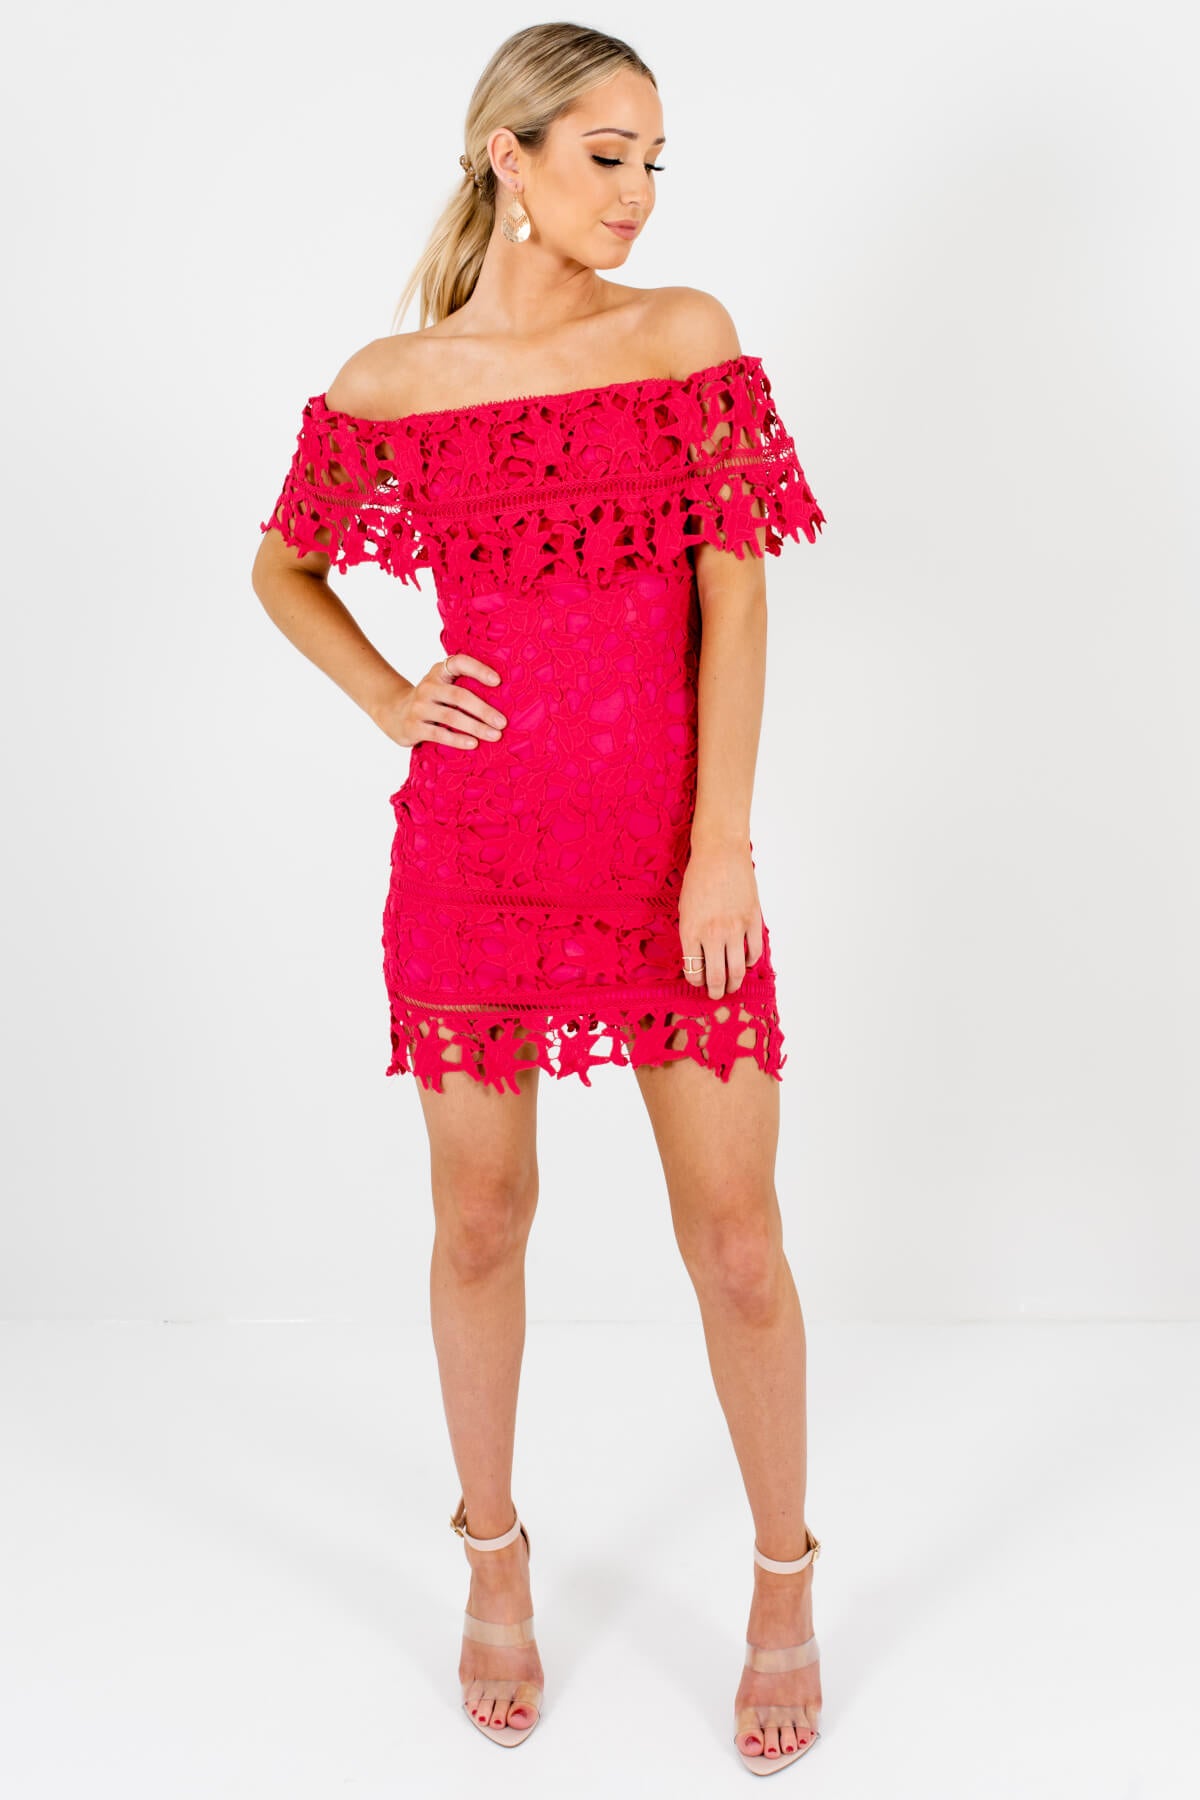 Women's Hot Pink Spring And Summertime Boutique Clothing